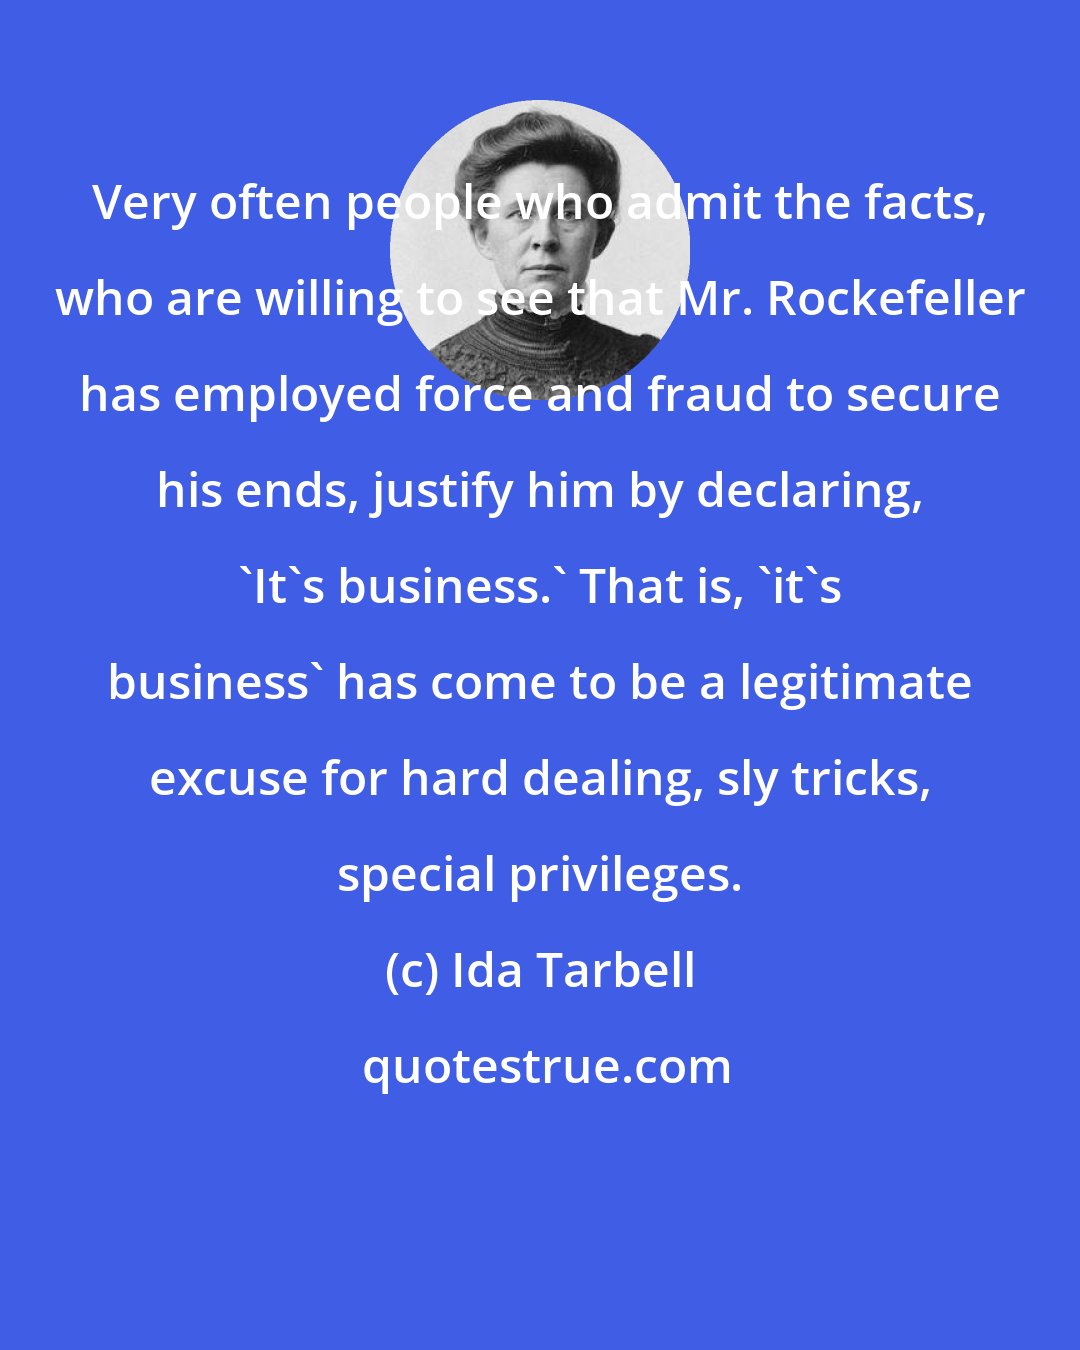 Ida Tarbell: Very often people who admit the facts, who are willing to see that Mr. Rockefeller has employed force and fraud to secure his ends, justify him by declaring, 'It's business.' That is, 'it's business' has come to be a legitimate excuse for hard dealing, sly tricks, special privileges.